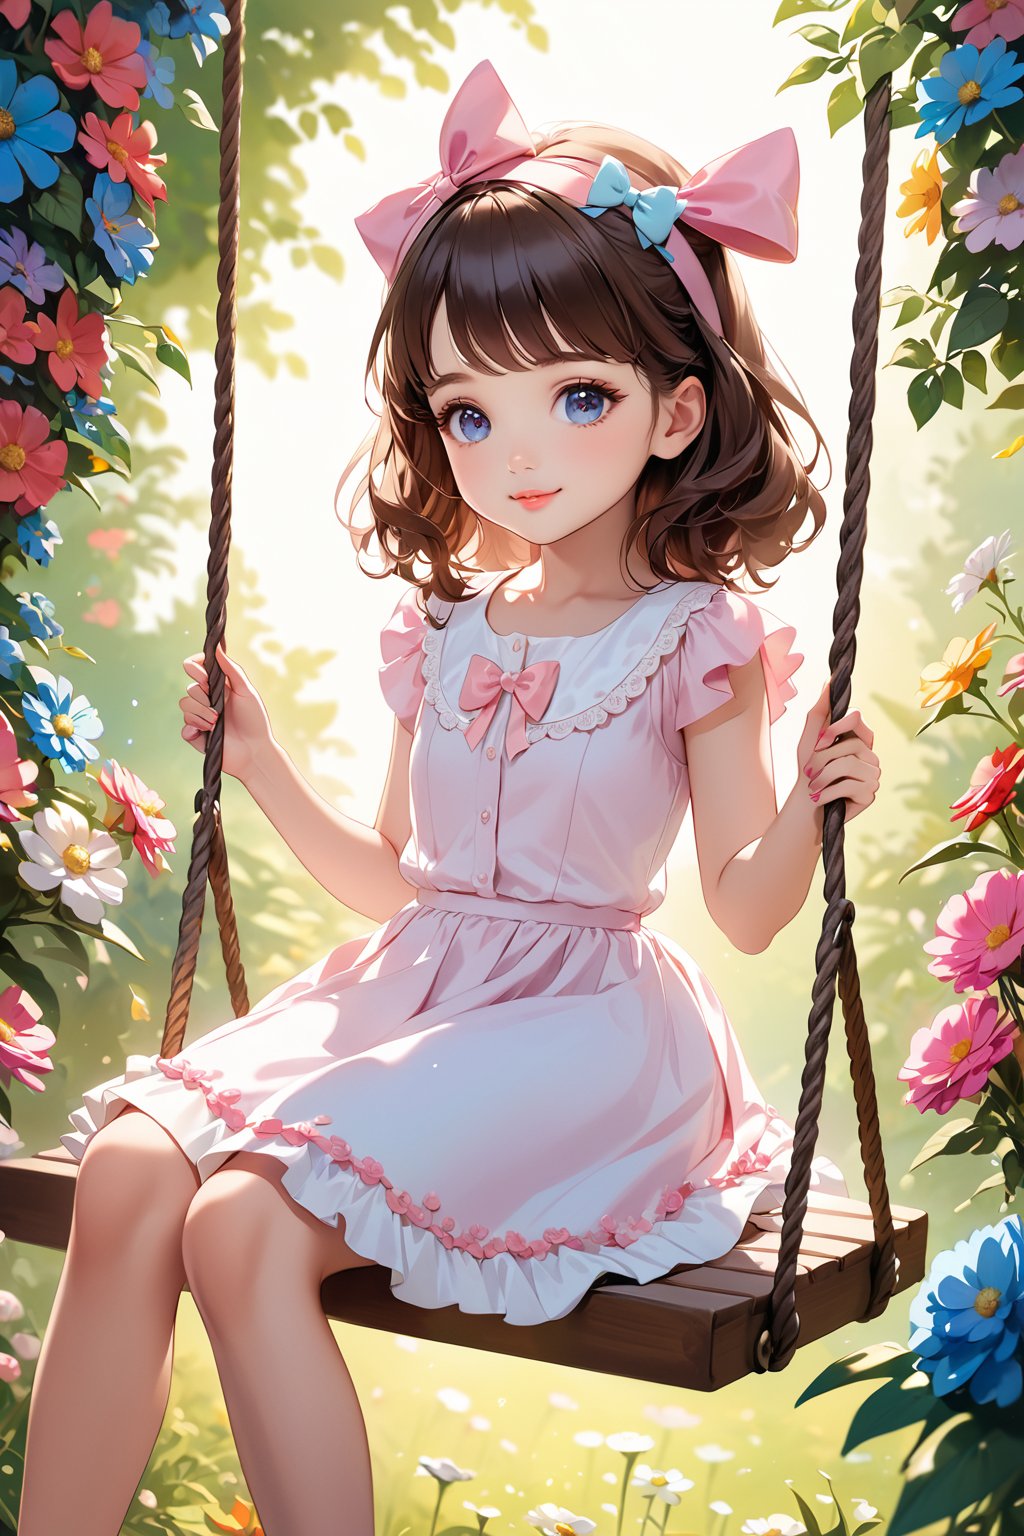 (best quality, highres), long brown hair,bow on head,girl,beautiful detailed eyes,beautiful detailed lips,long eyelashes,soft facial features, cute smile, looking at, flower garden background, sitting on a swing, vibrant colors,pleasant lighting,artistic rendering,(The cutest girl in the world:1.5),